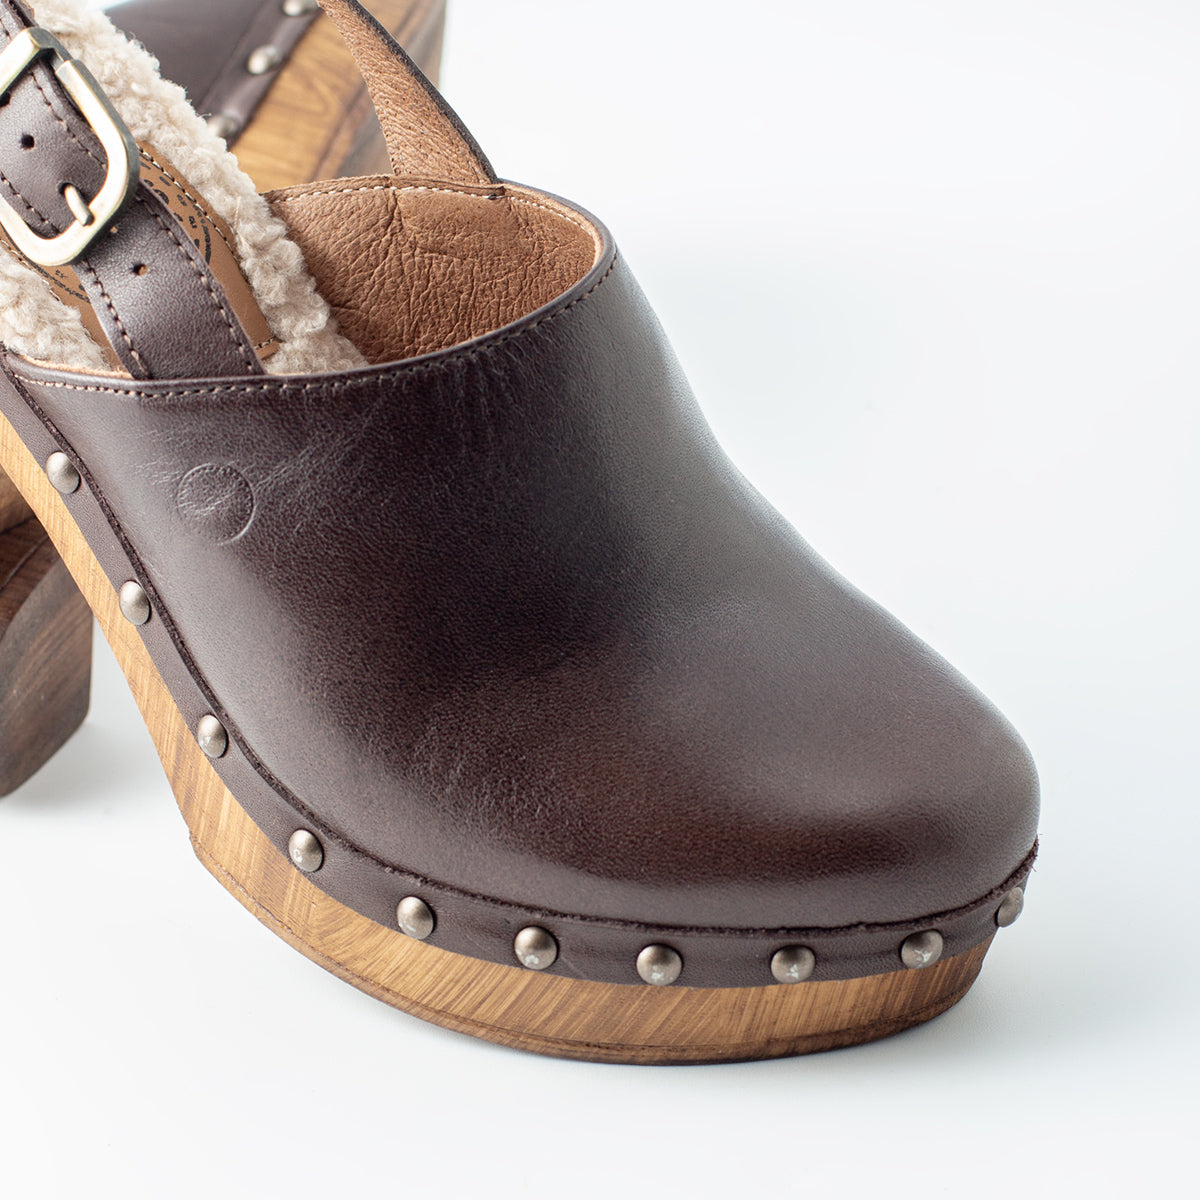 Chocolate Leather Strap Cullera Clog